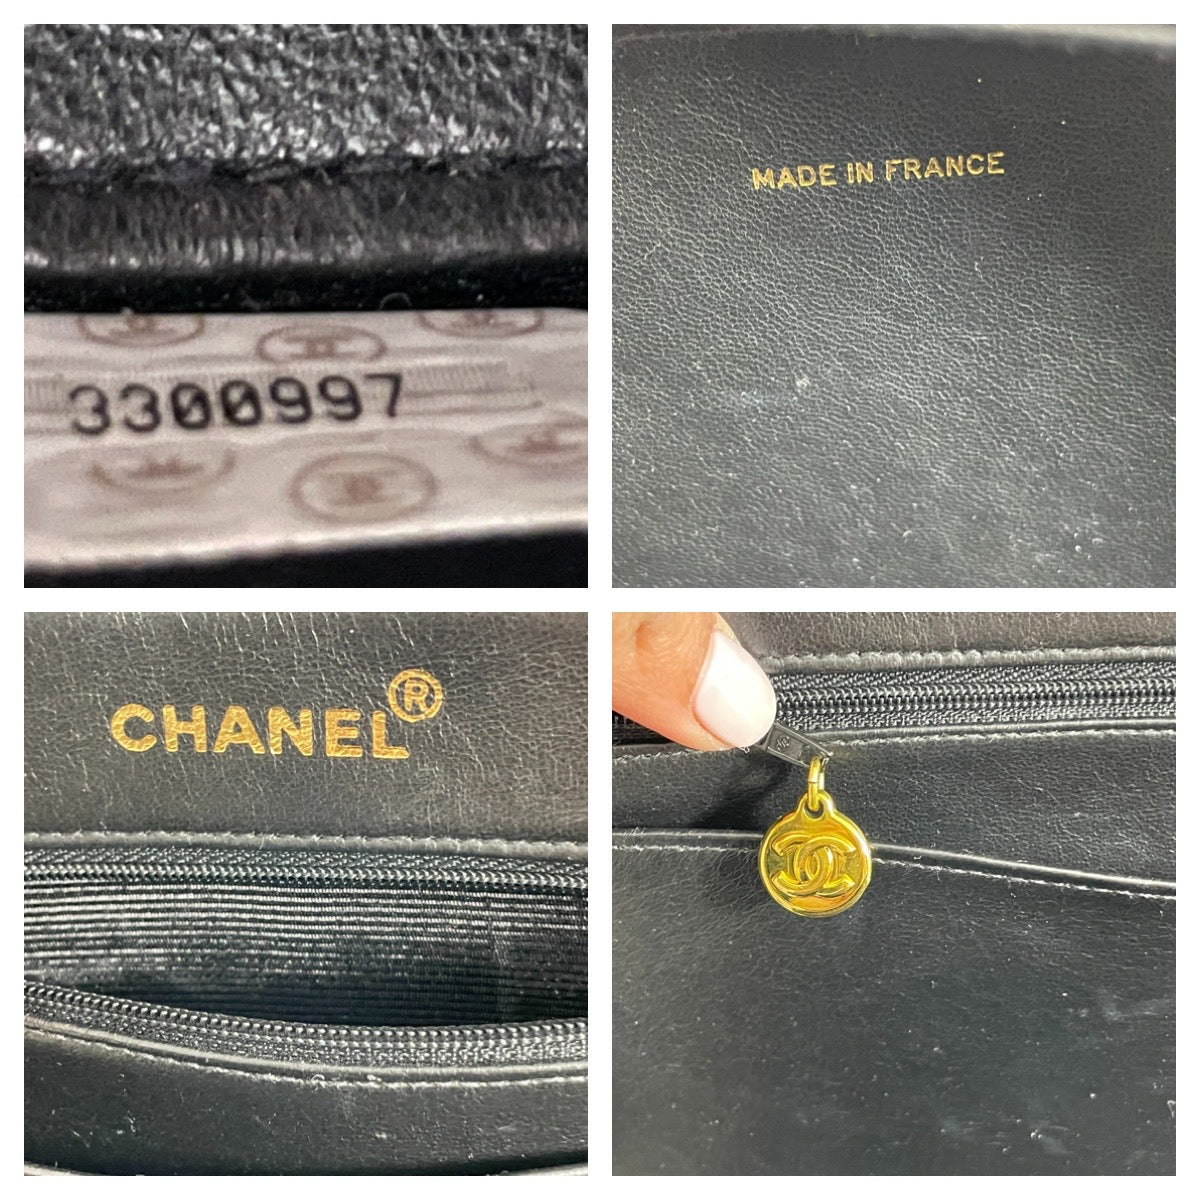 CHANEL, Bags, Chanel Very Rare Vintage Brown Lunch Box